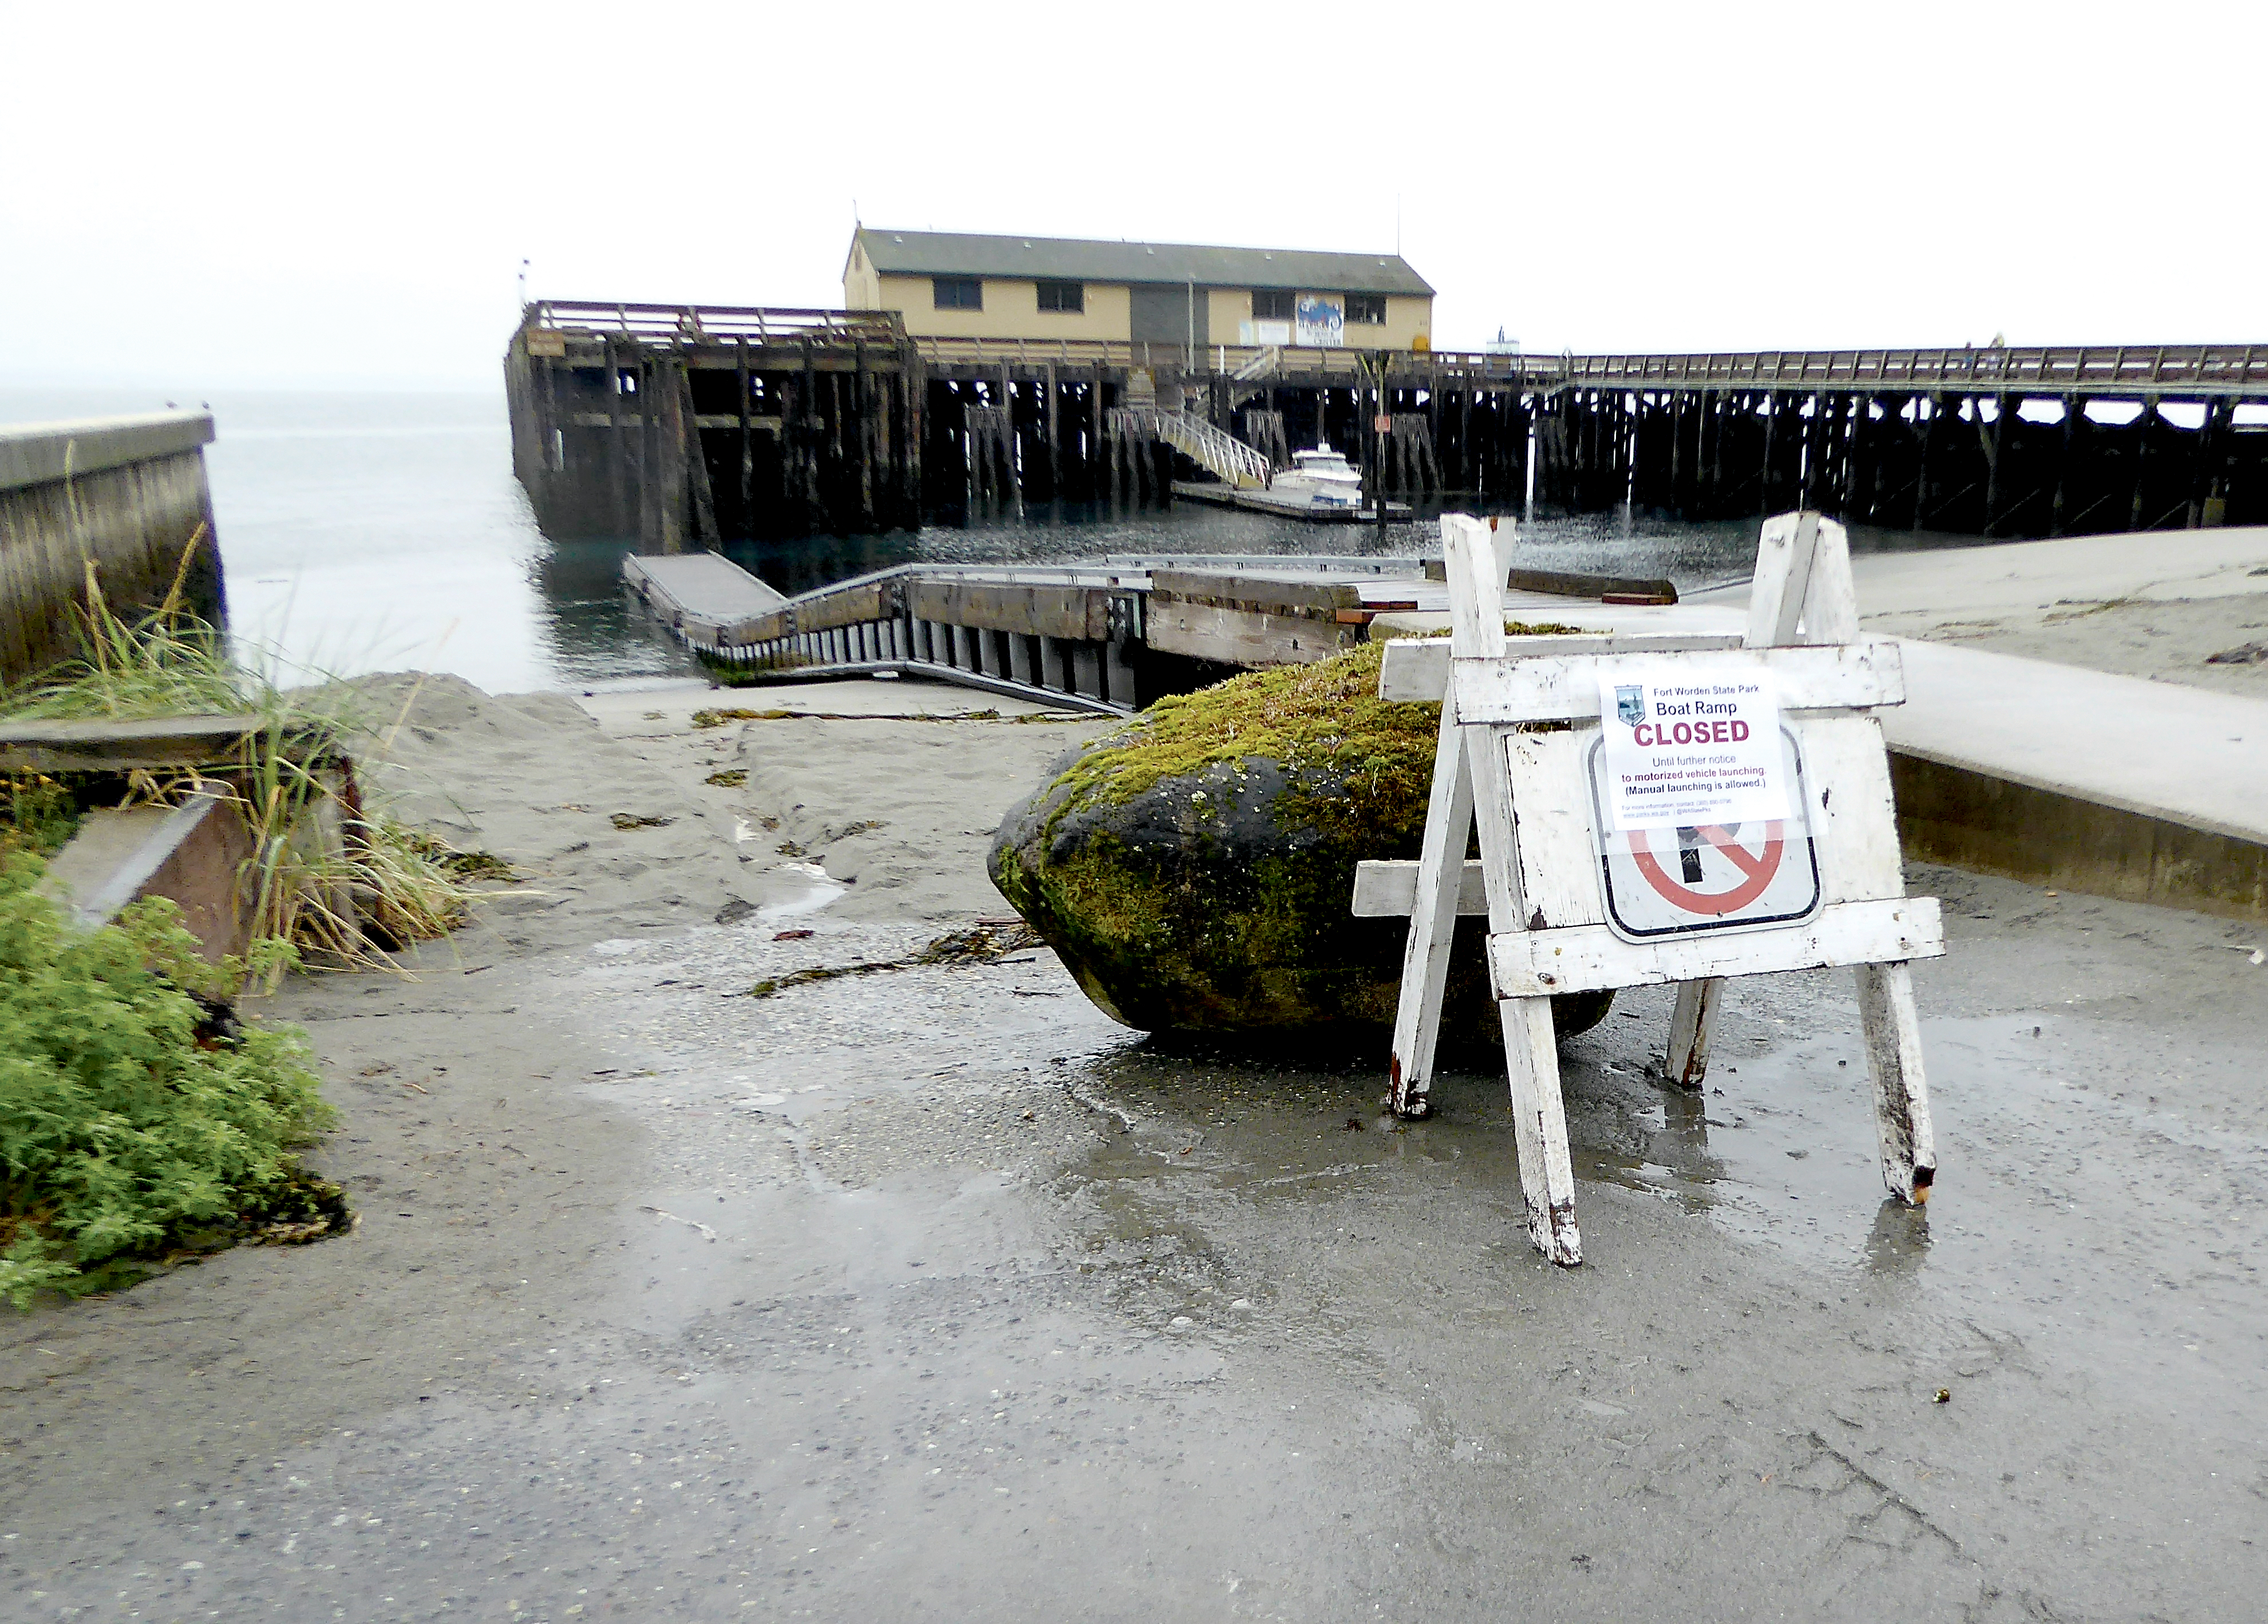 Park personnel moved a boulder in front of the Fort Worden State Park boat ramp to enforce its closure. Charlie Bermant/Peninsula Daily News